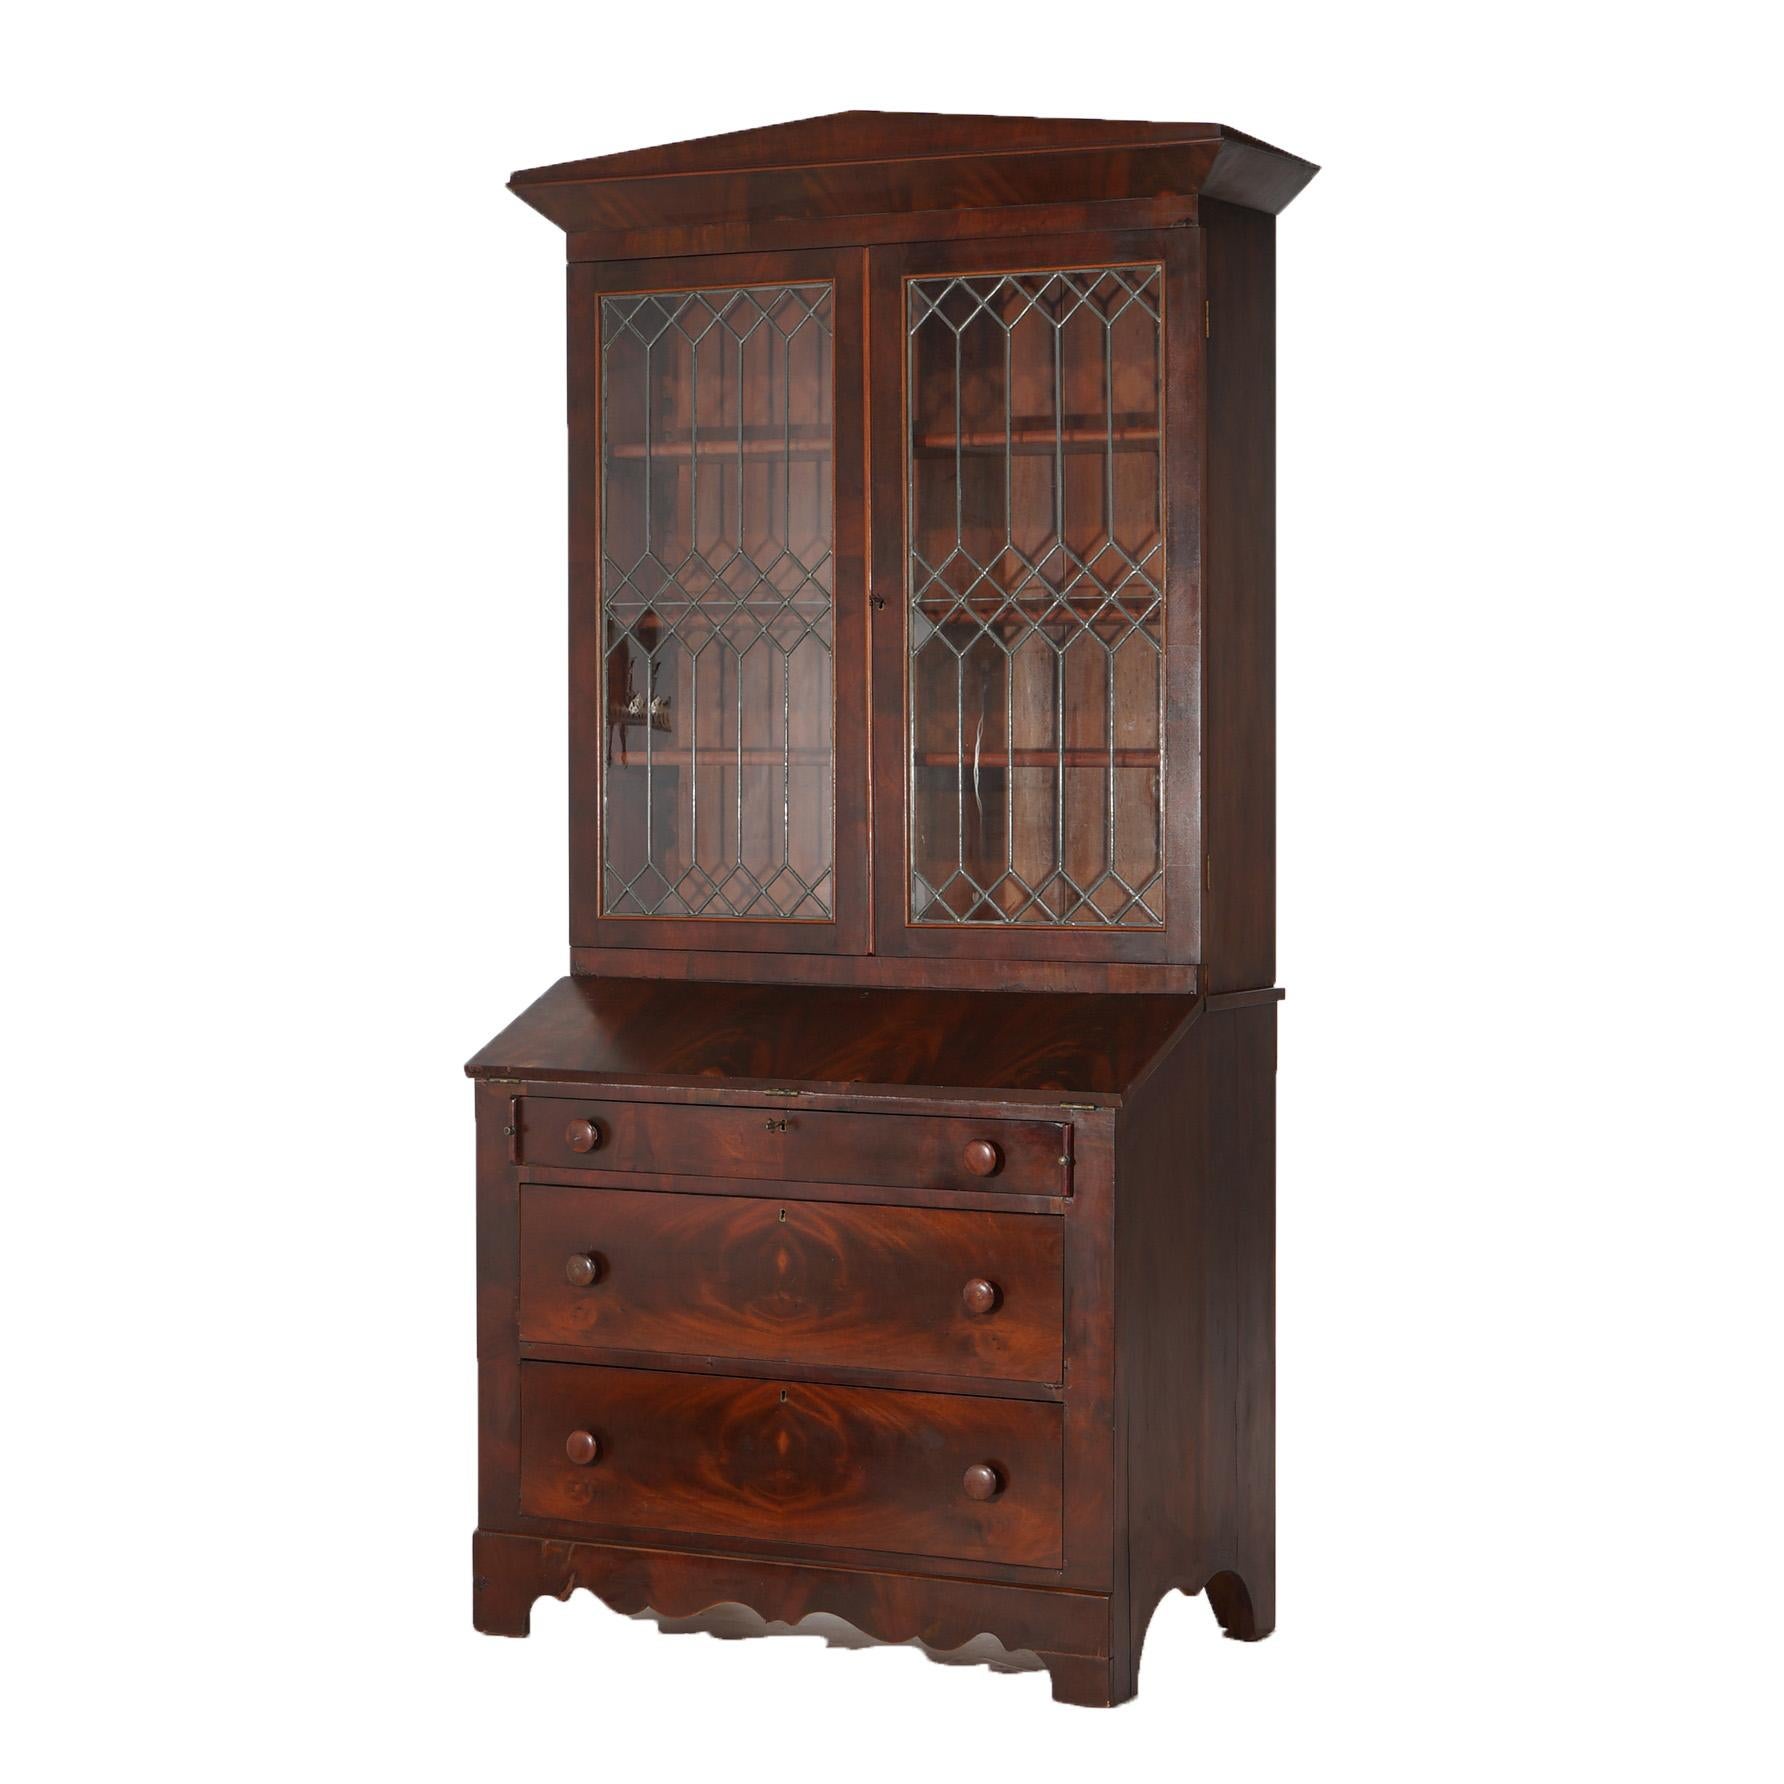 An antique American Empire secretary offers flame mahogany construction with upper having arched pediment over bookcase having double doors with leaded glass over lower with slant front desk and long drawers, c1840

Measures - 87